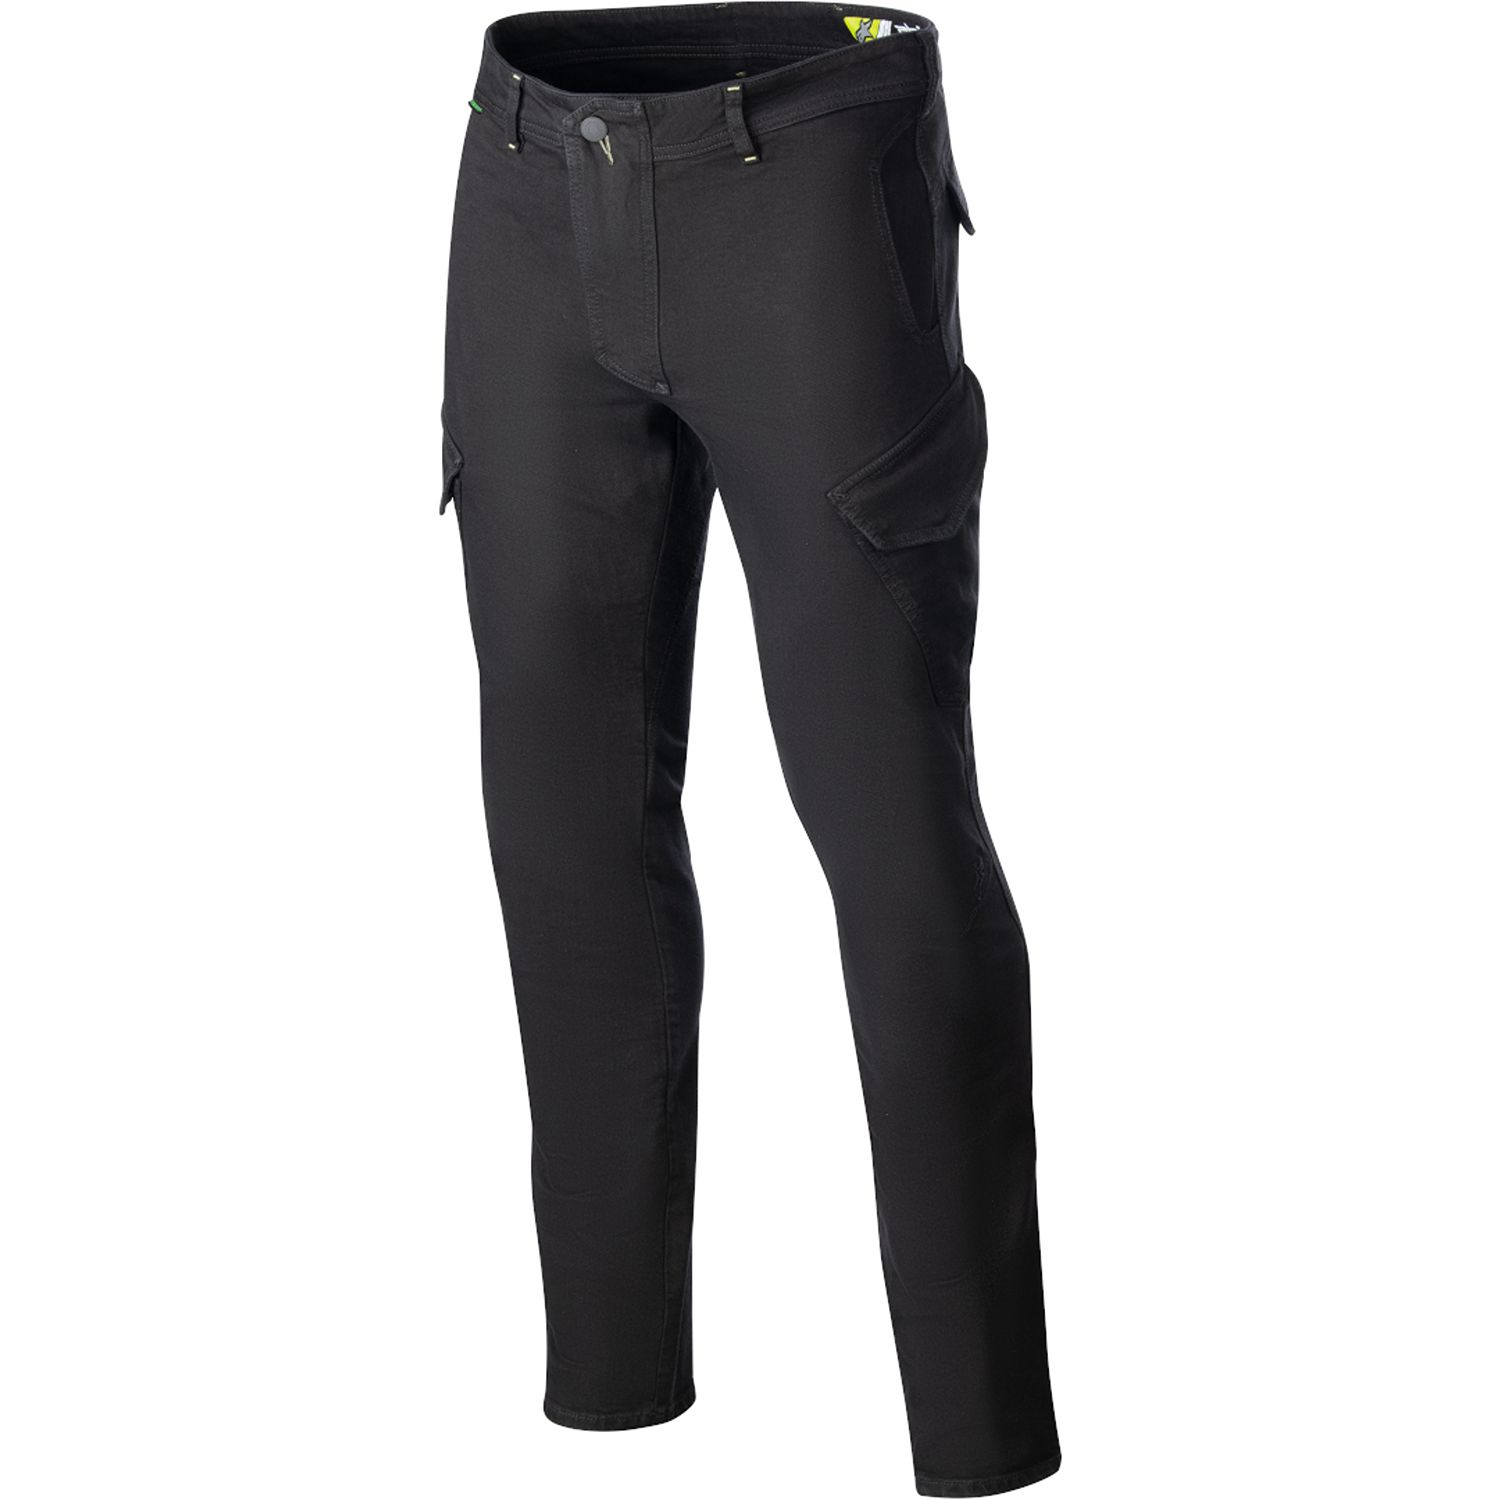 Image of Alpinestars Caliber Slim Fit Tech Riding Pants Anthracite Taille 36